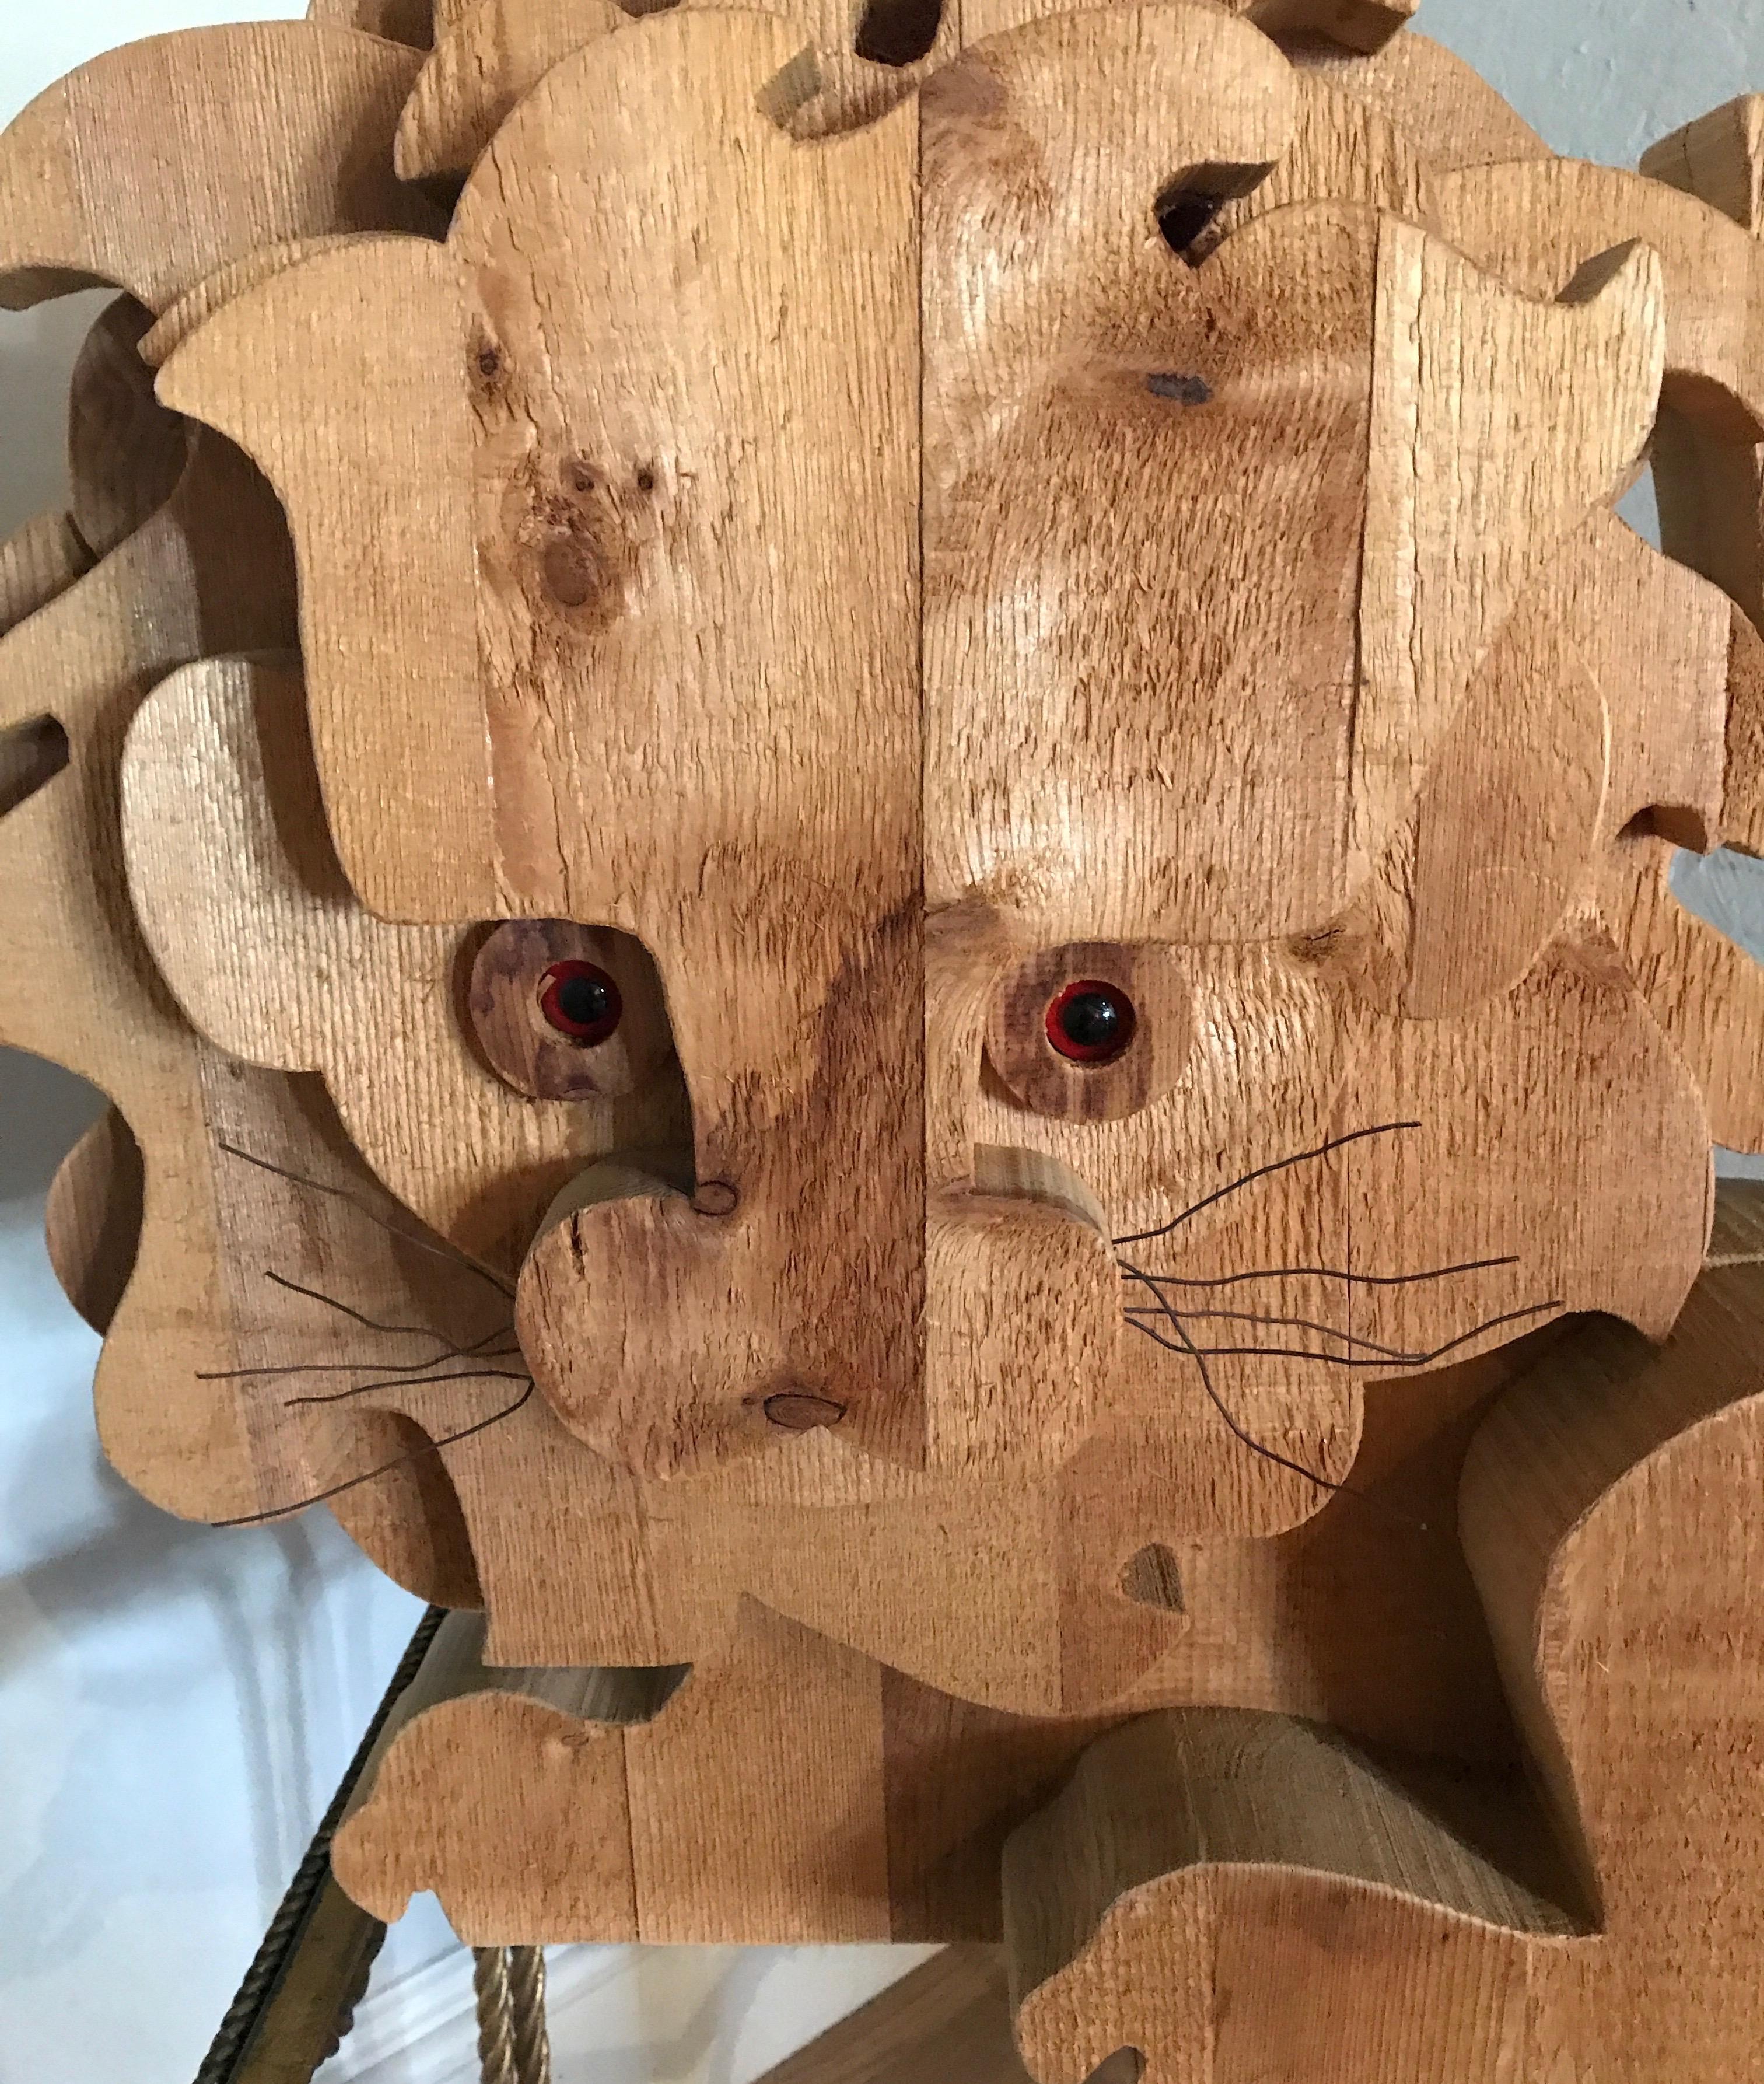 Whimsical modern wood sculpture of a lion. His eyes will capture you.